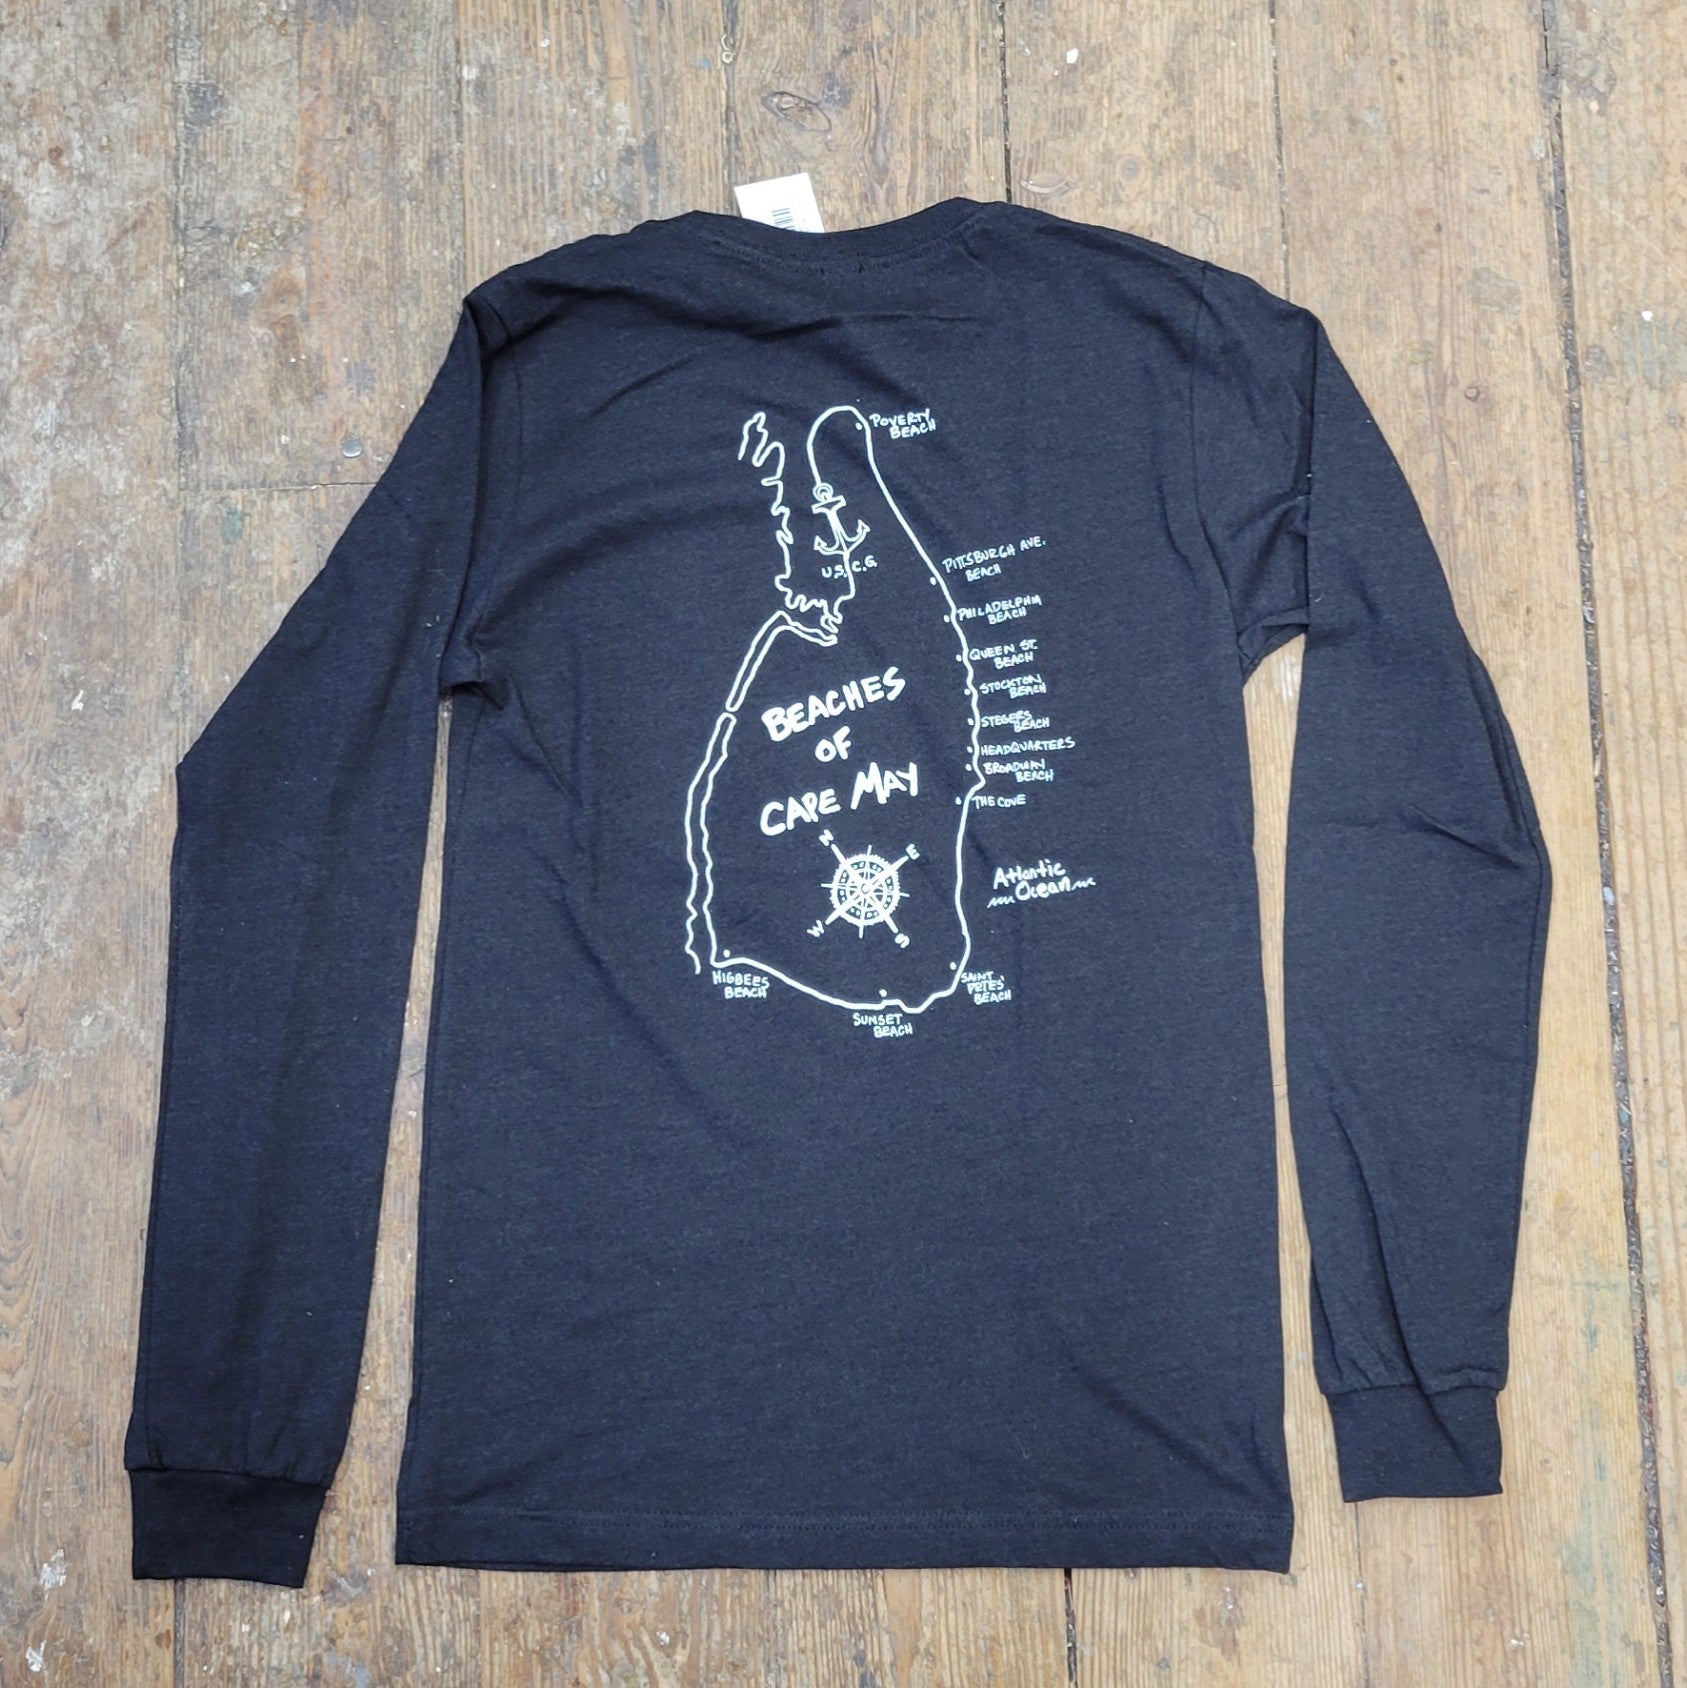 Heather, black long-sleeve with a 'Beaches of Cape May' design on the back in white ink.